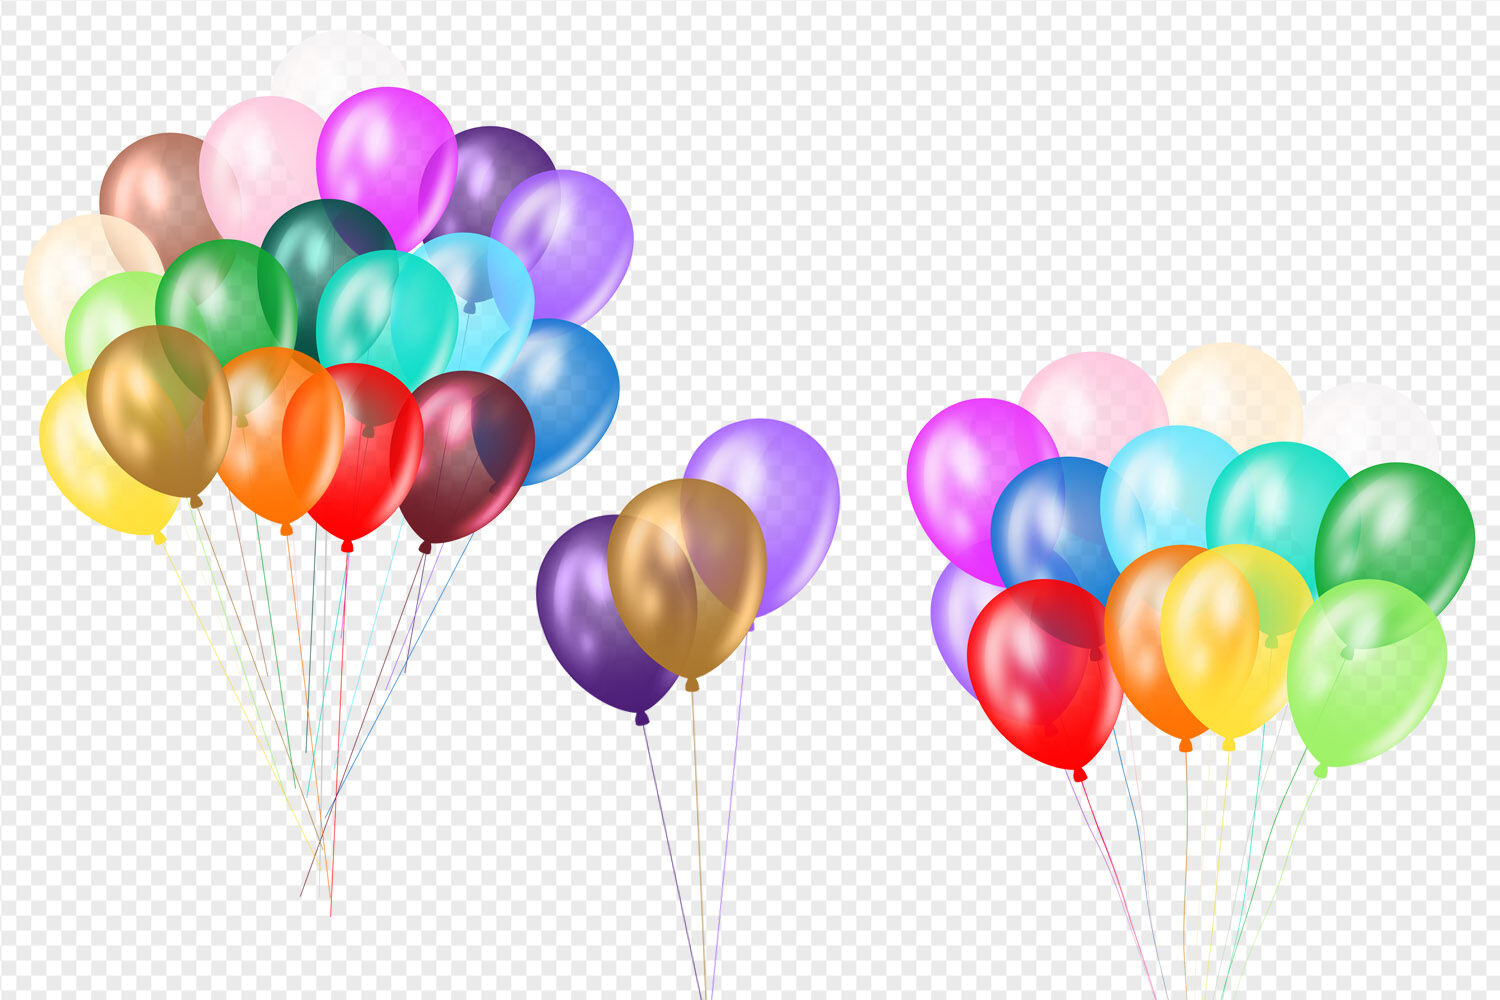 Rainbow Balloon Clipart PNG Images Graphic by lilyuri0205